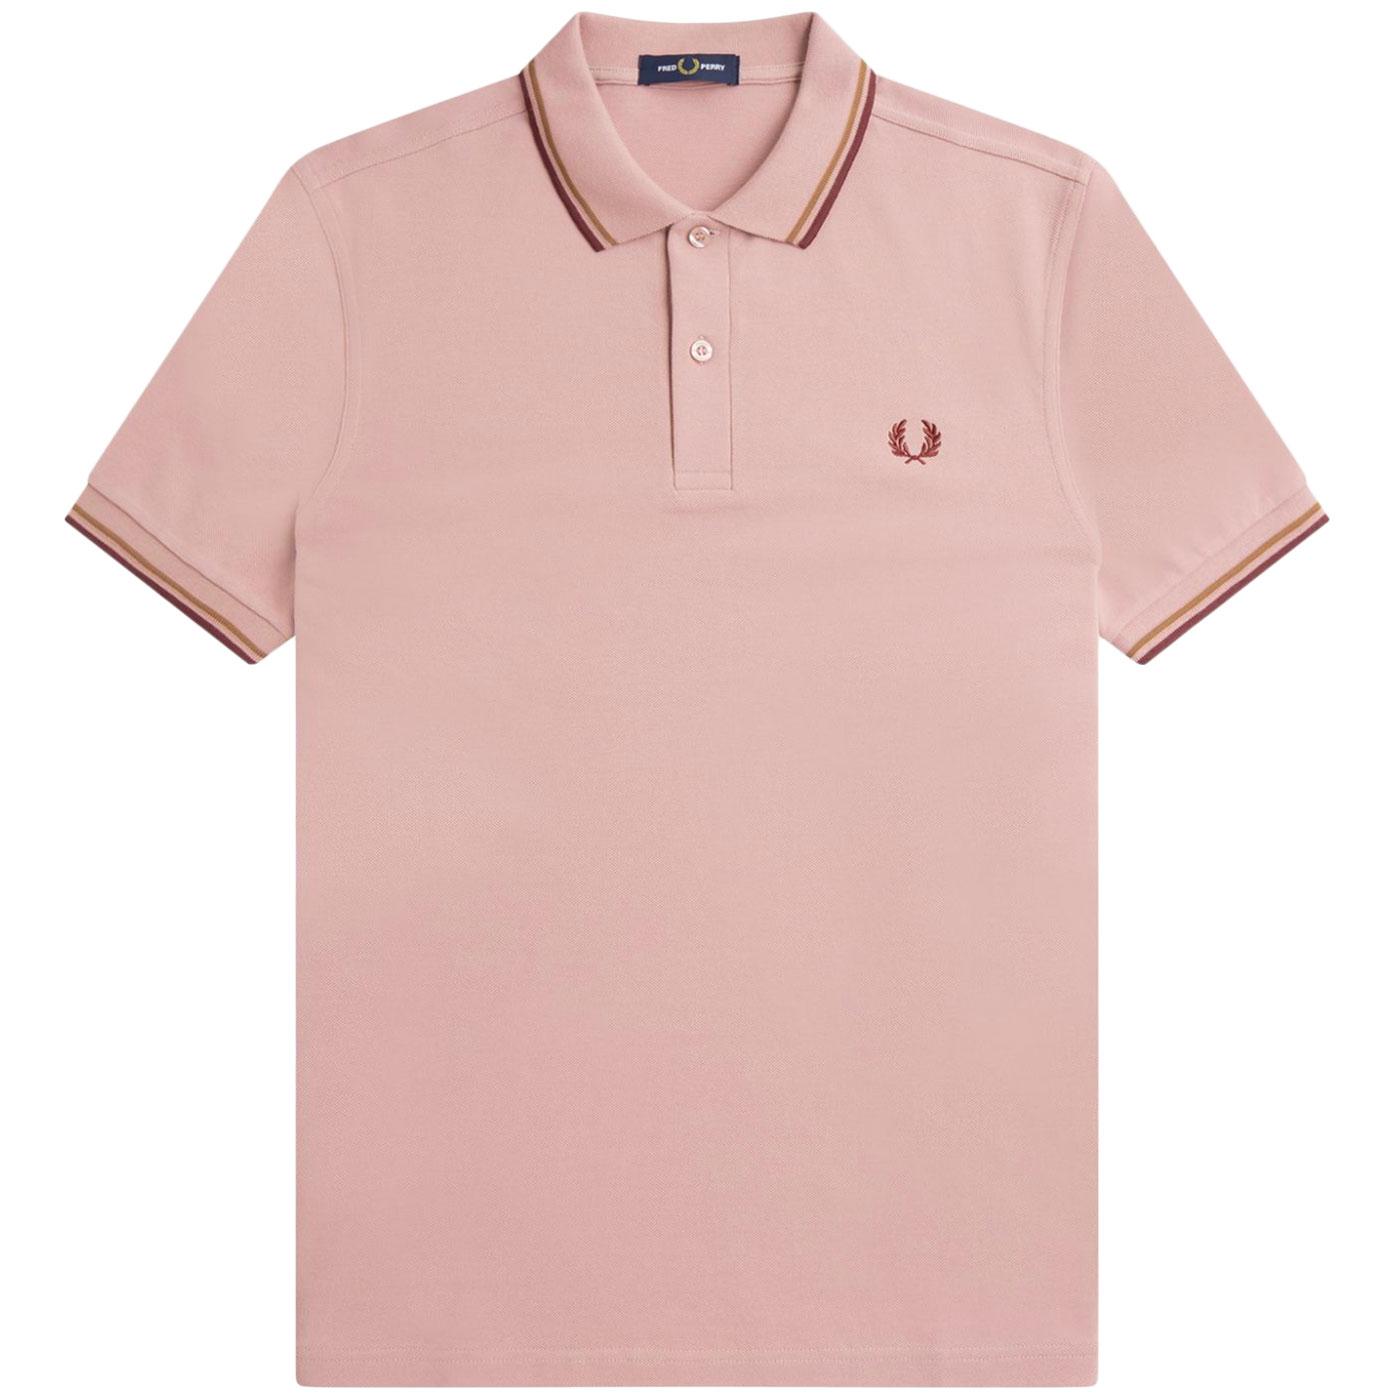 FRED PERRY M3600 Mod Twin Tipped Polo Shirt DRP/SS